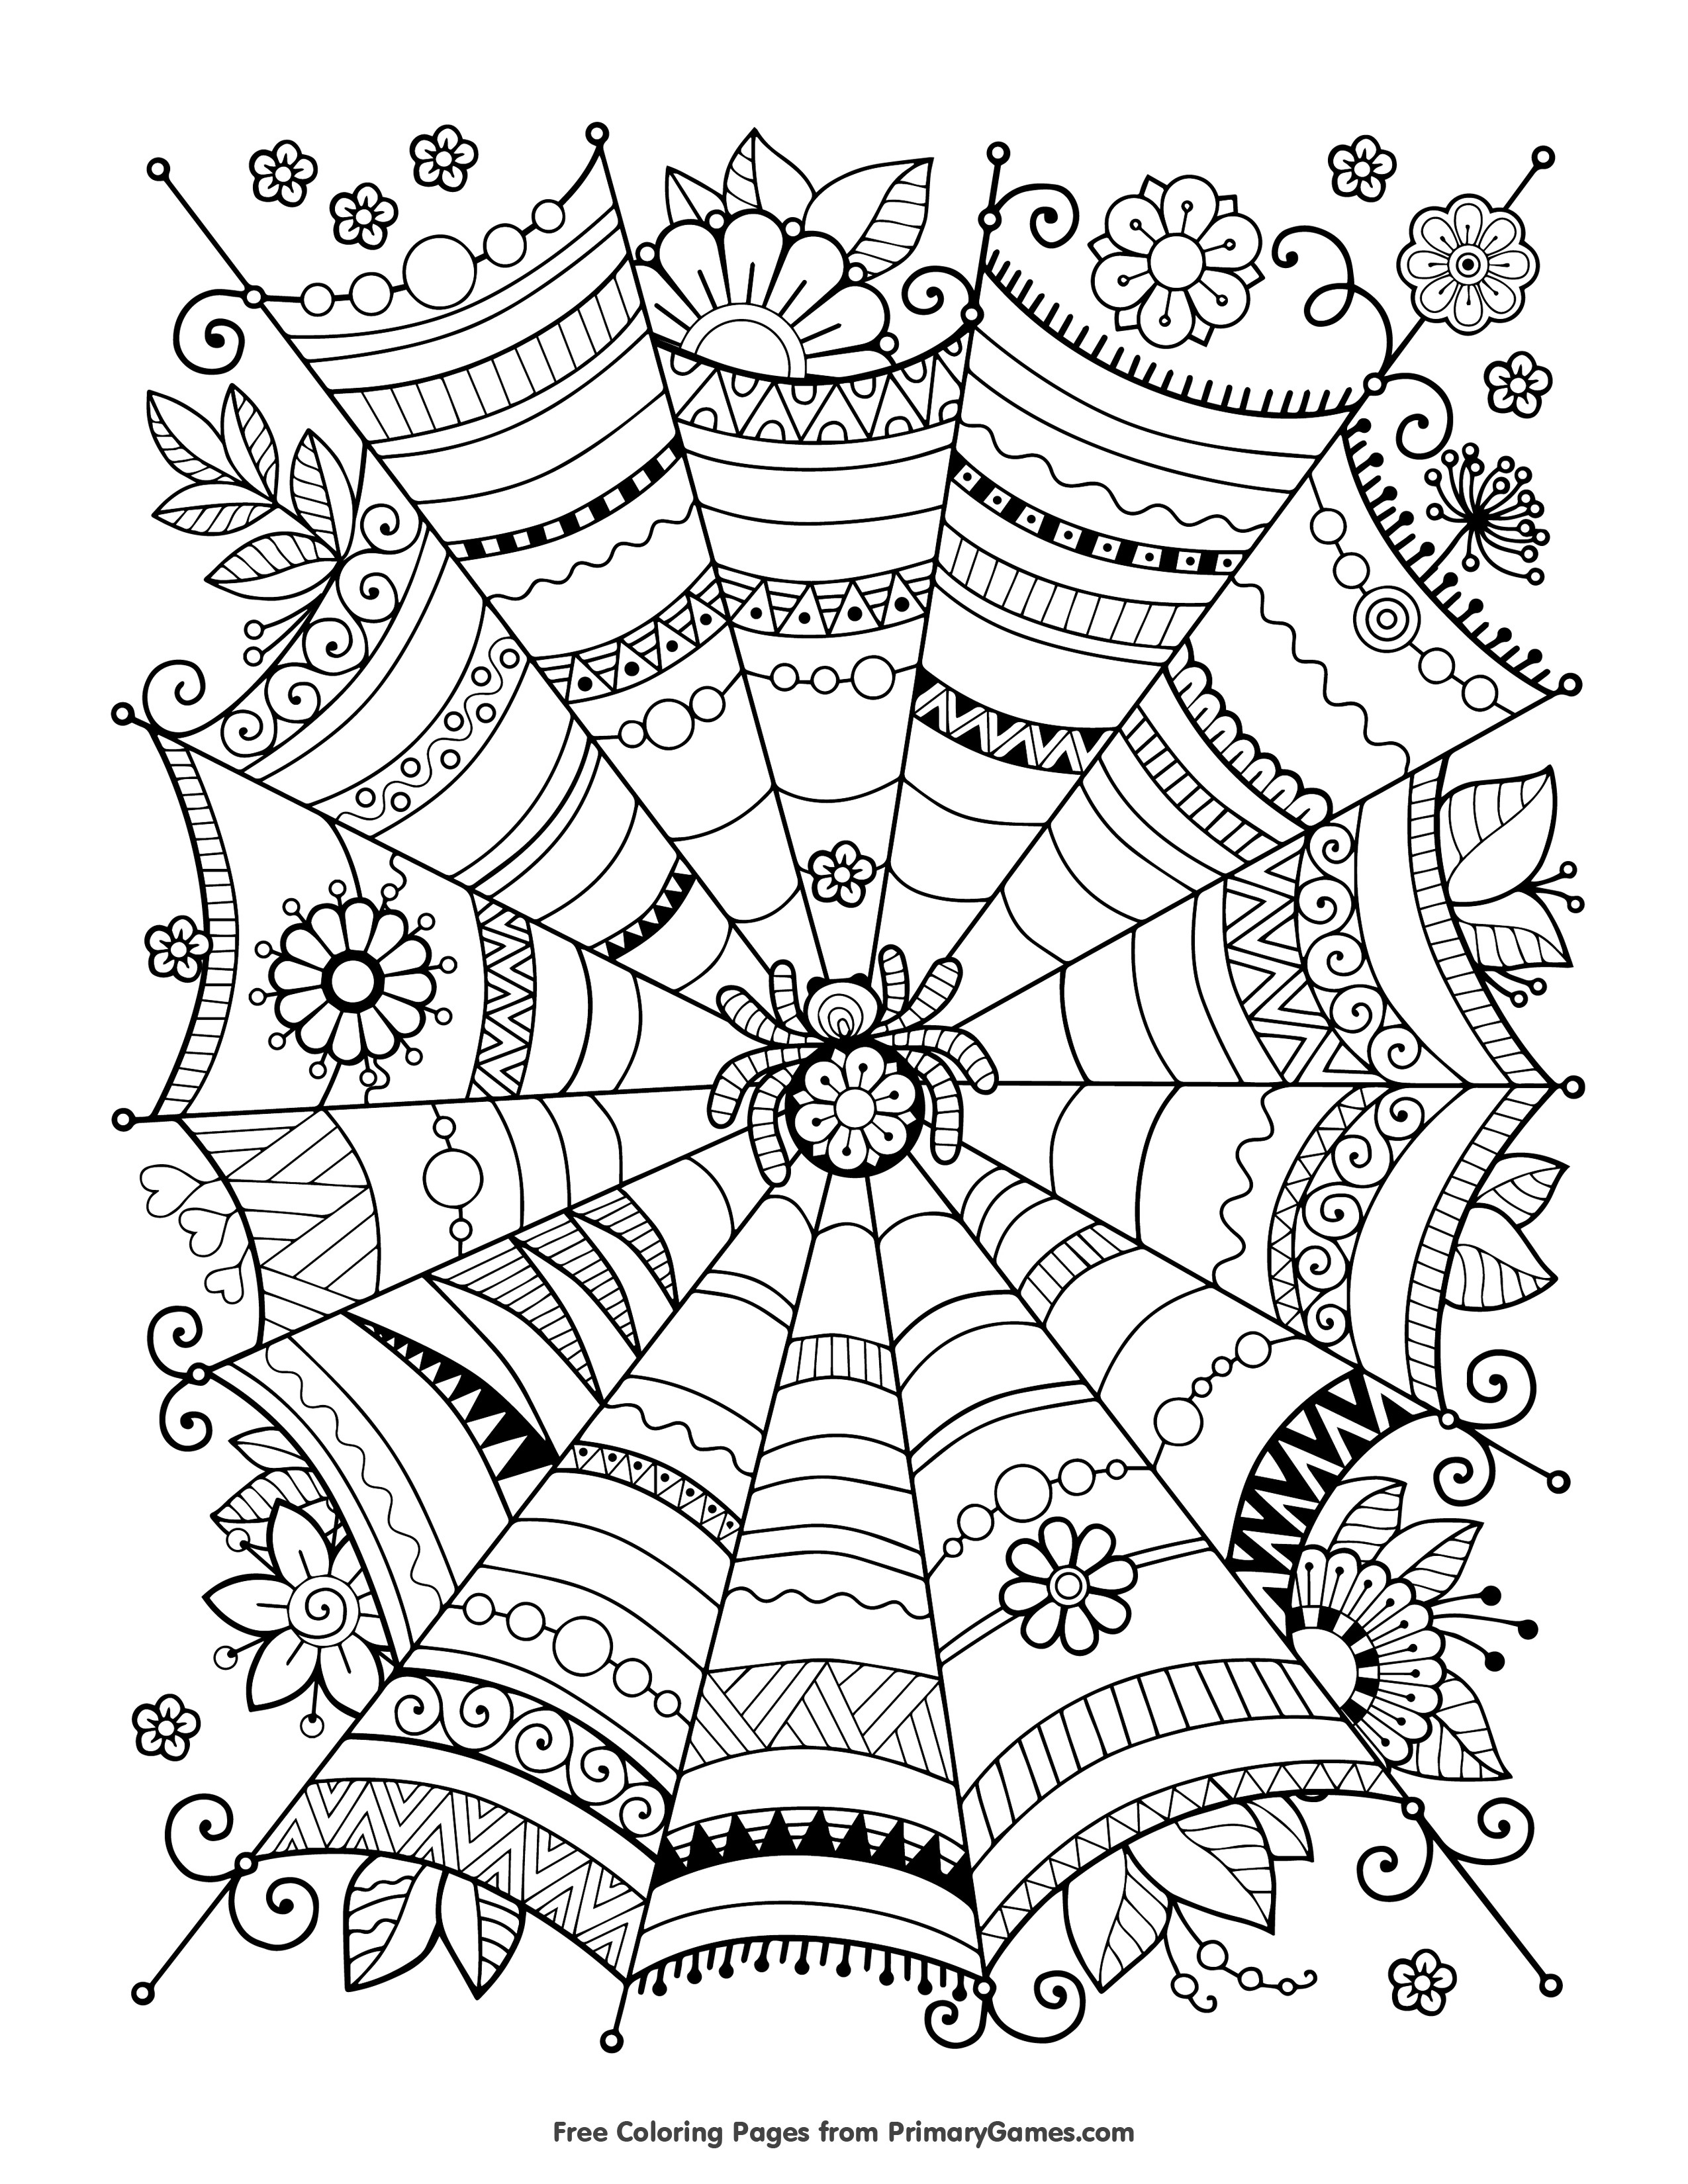 Free Printable Halloween Coloring Page Free Printable Coloring Pages For Halloween Archives